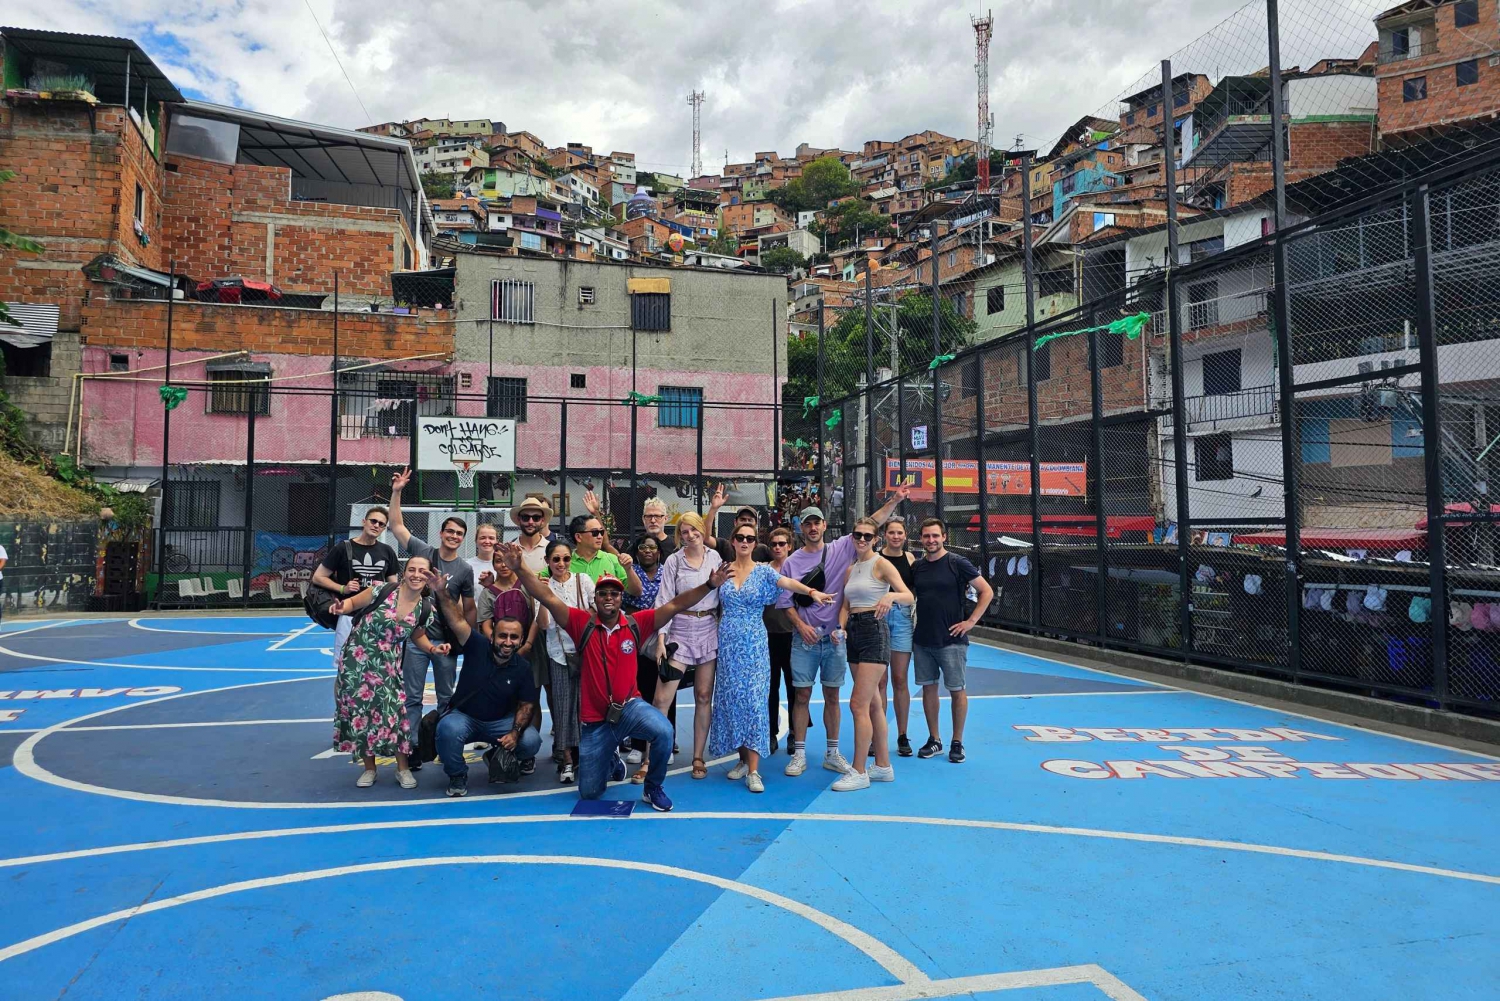 Graffiti Tour comuna 13 and cable car (made by local guides)